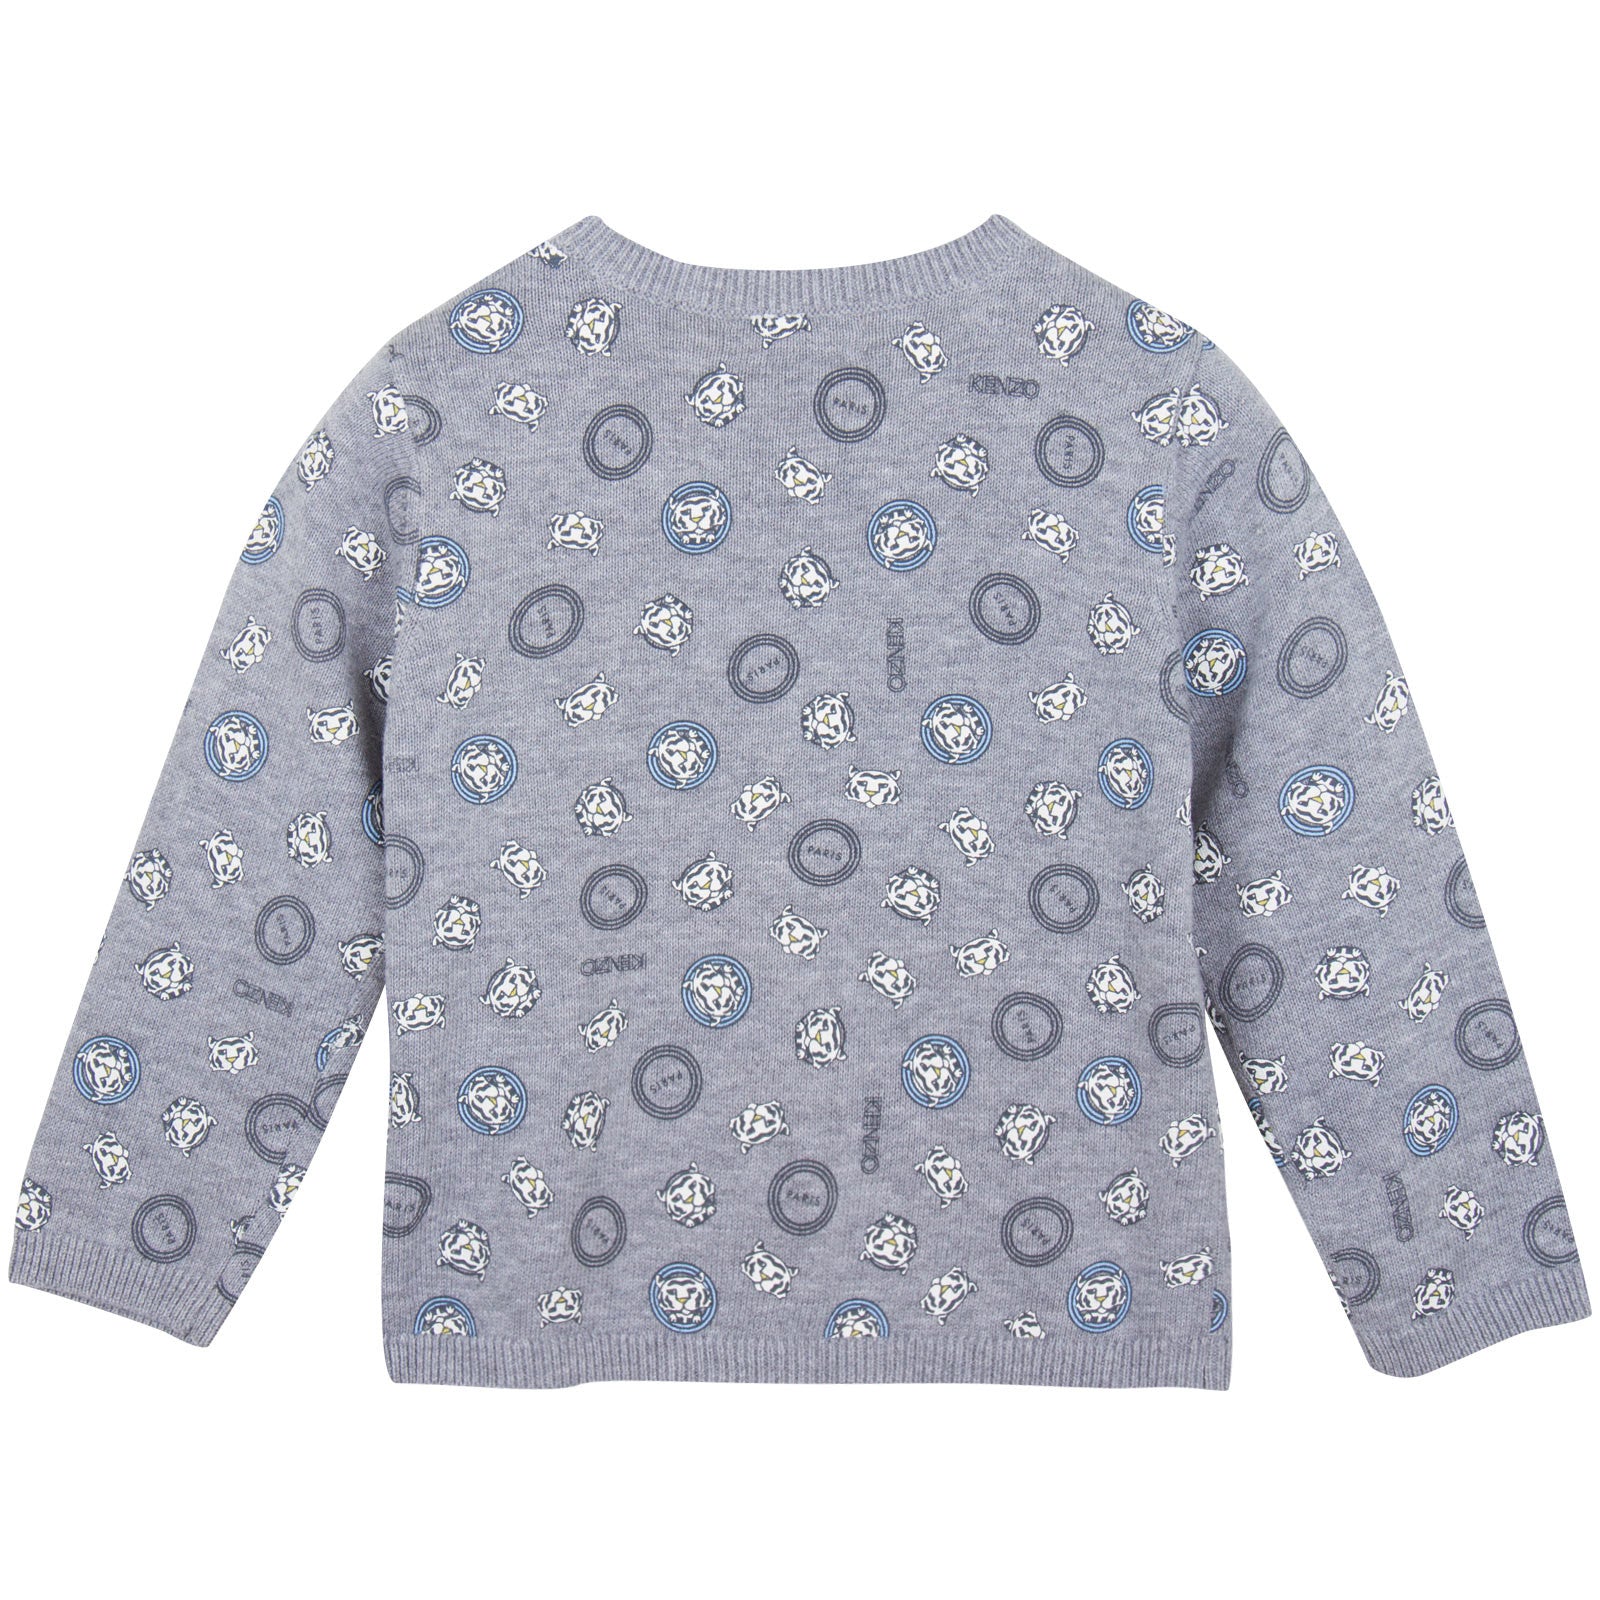 Baby Boys Grey Tiger Printed Cotton Knitted Cardigan - CÉMAROSE | Children's Fashion Store - 2